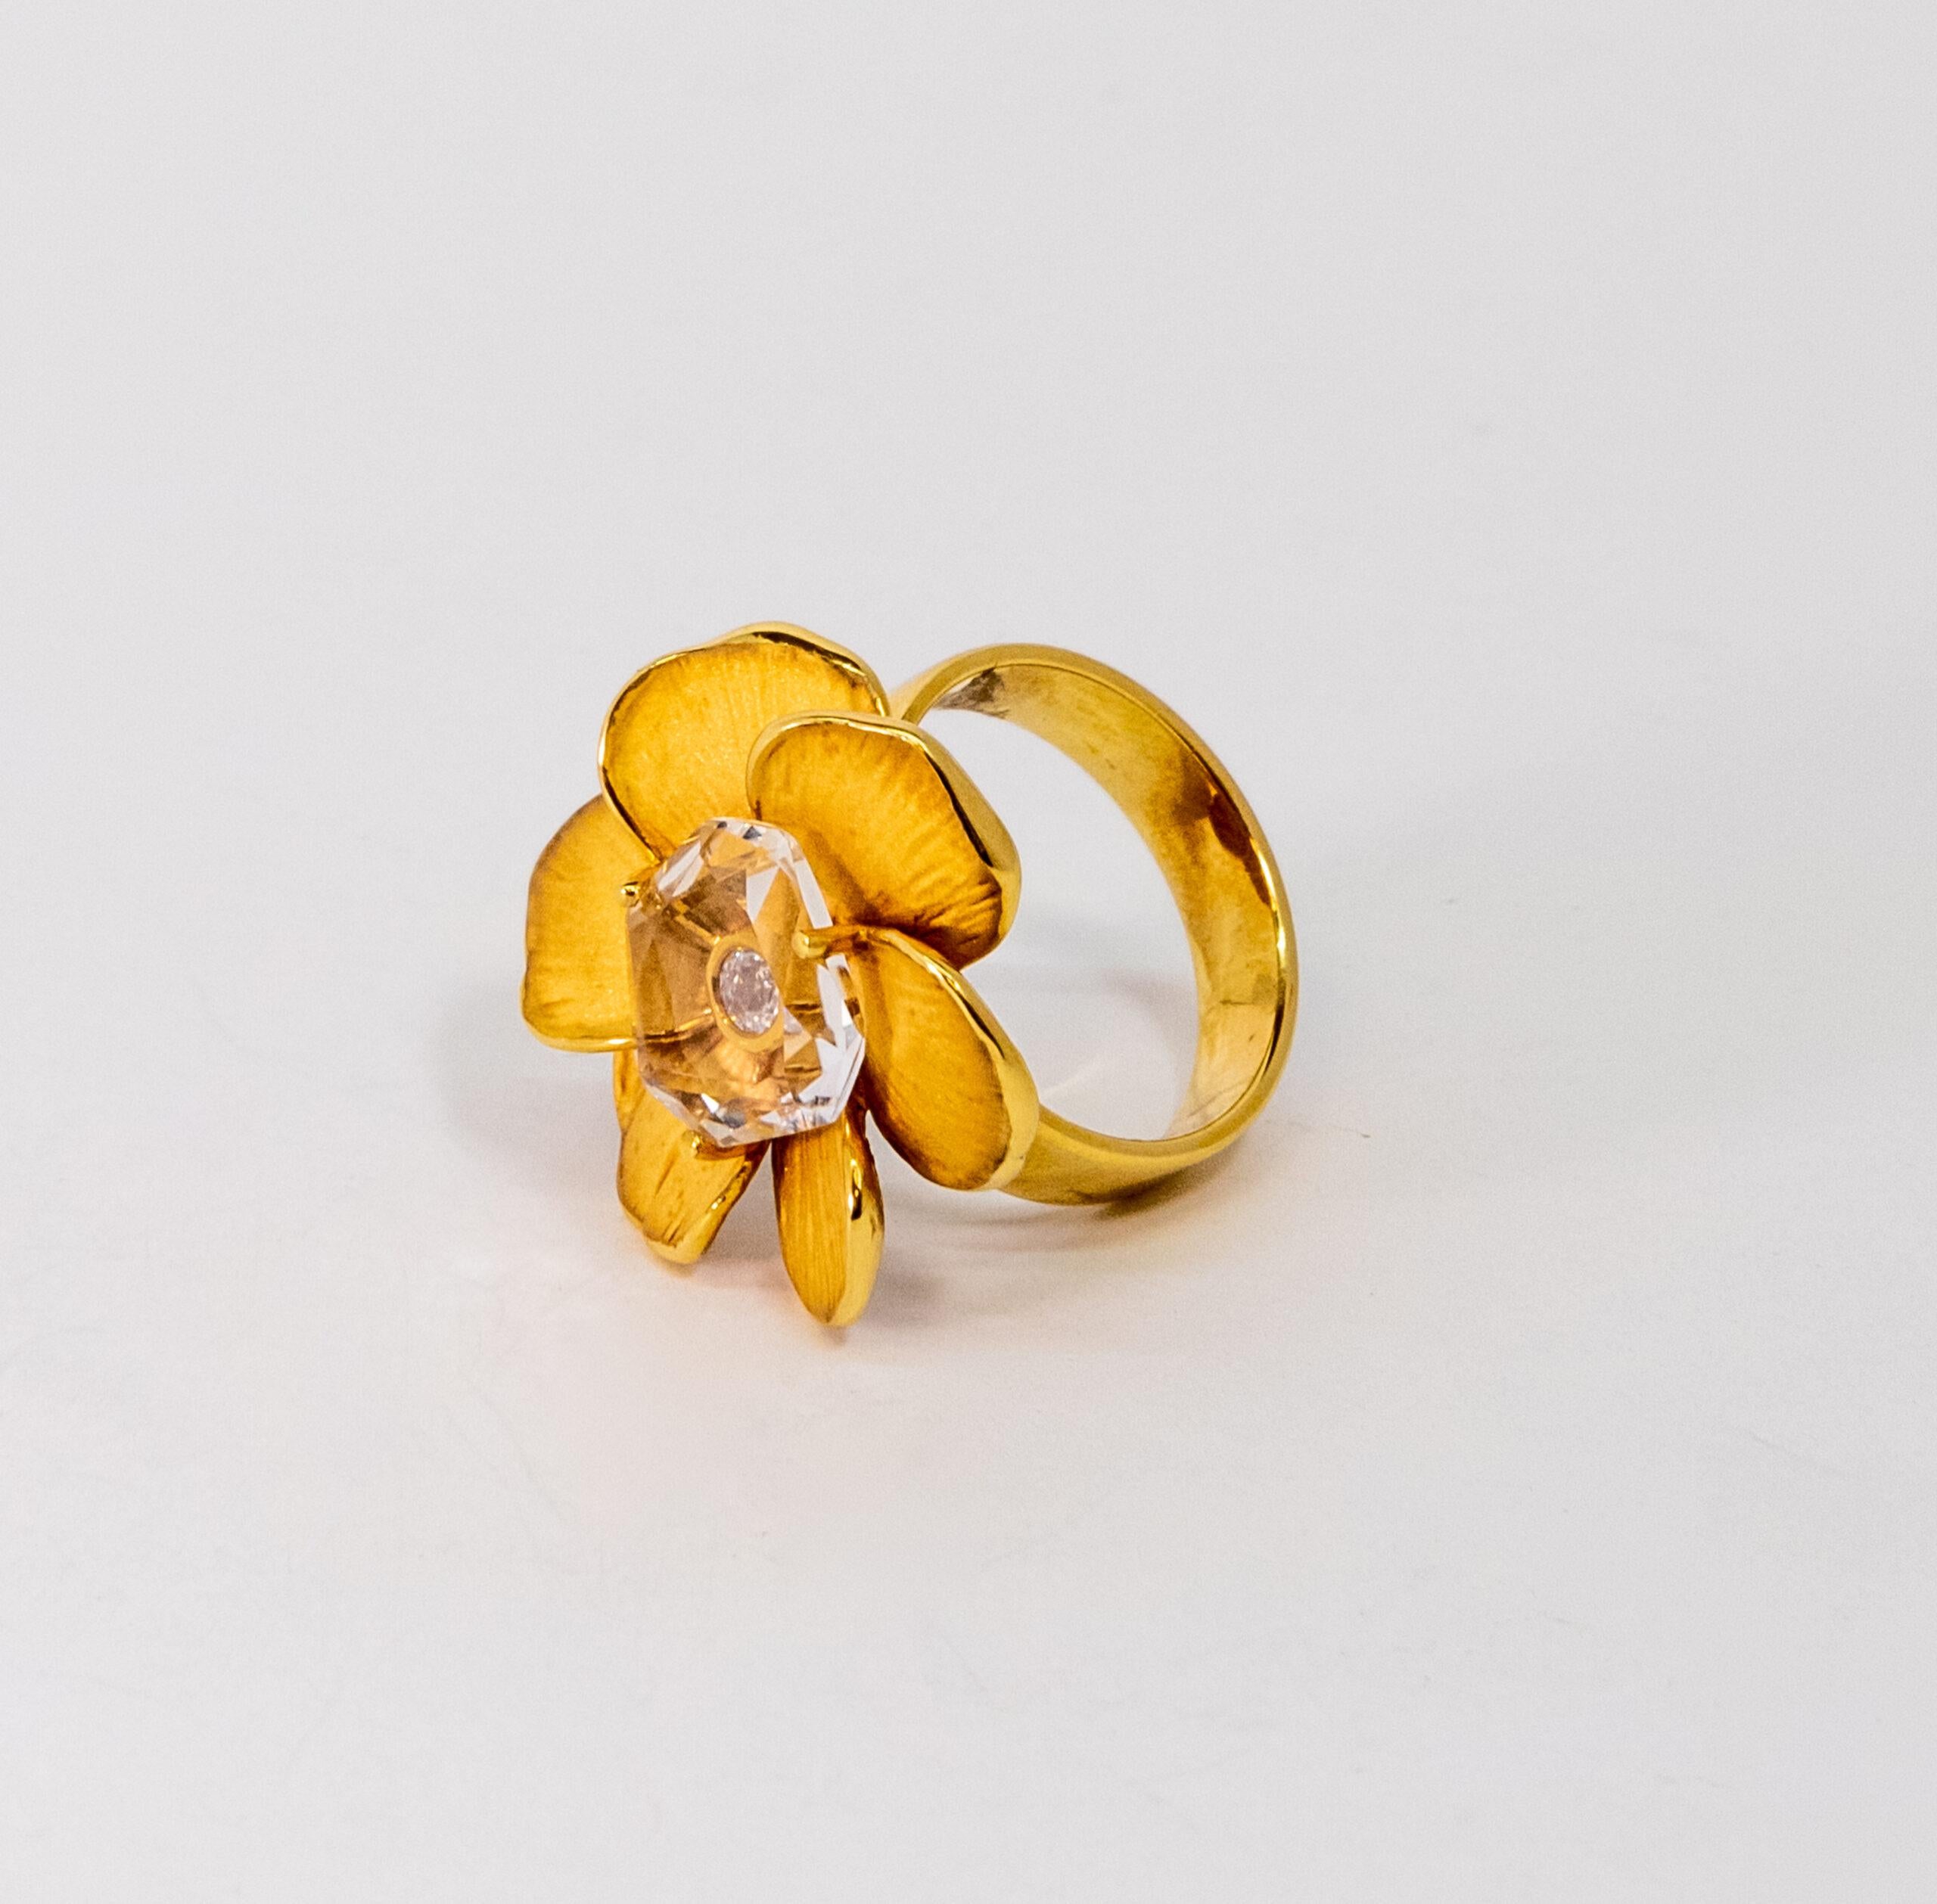 This ring is made of 18K Yellow Gold. It is designed as a flower with a diamond (~0.09ct) covered by crystal (1.00 un).

Size – 55 (7 US)